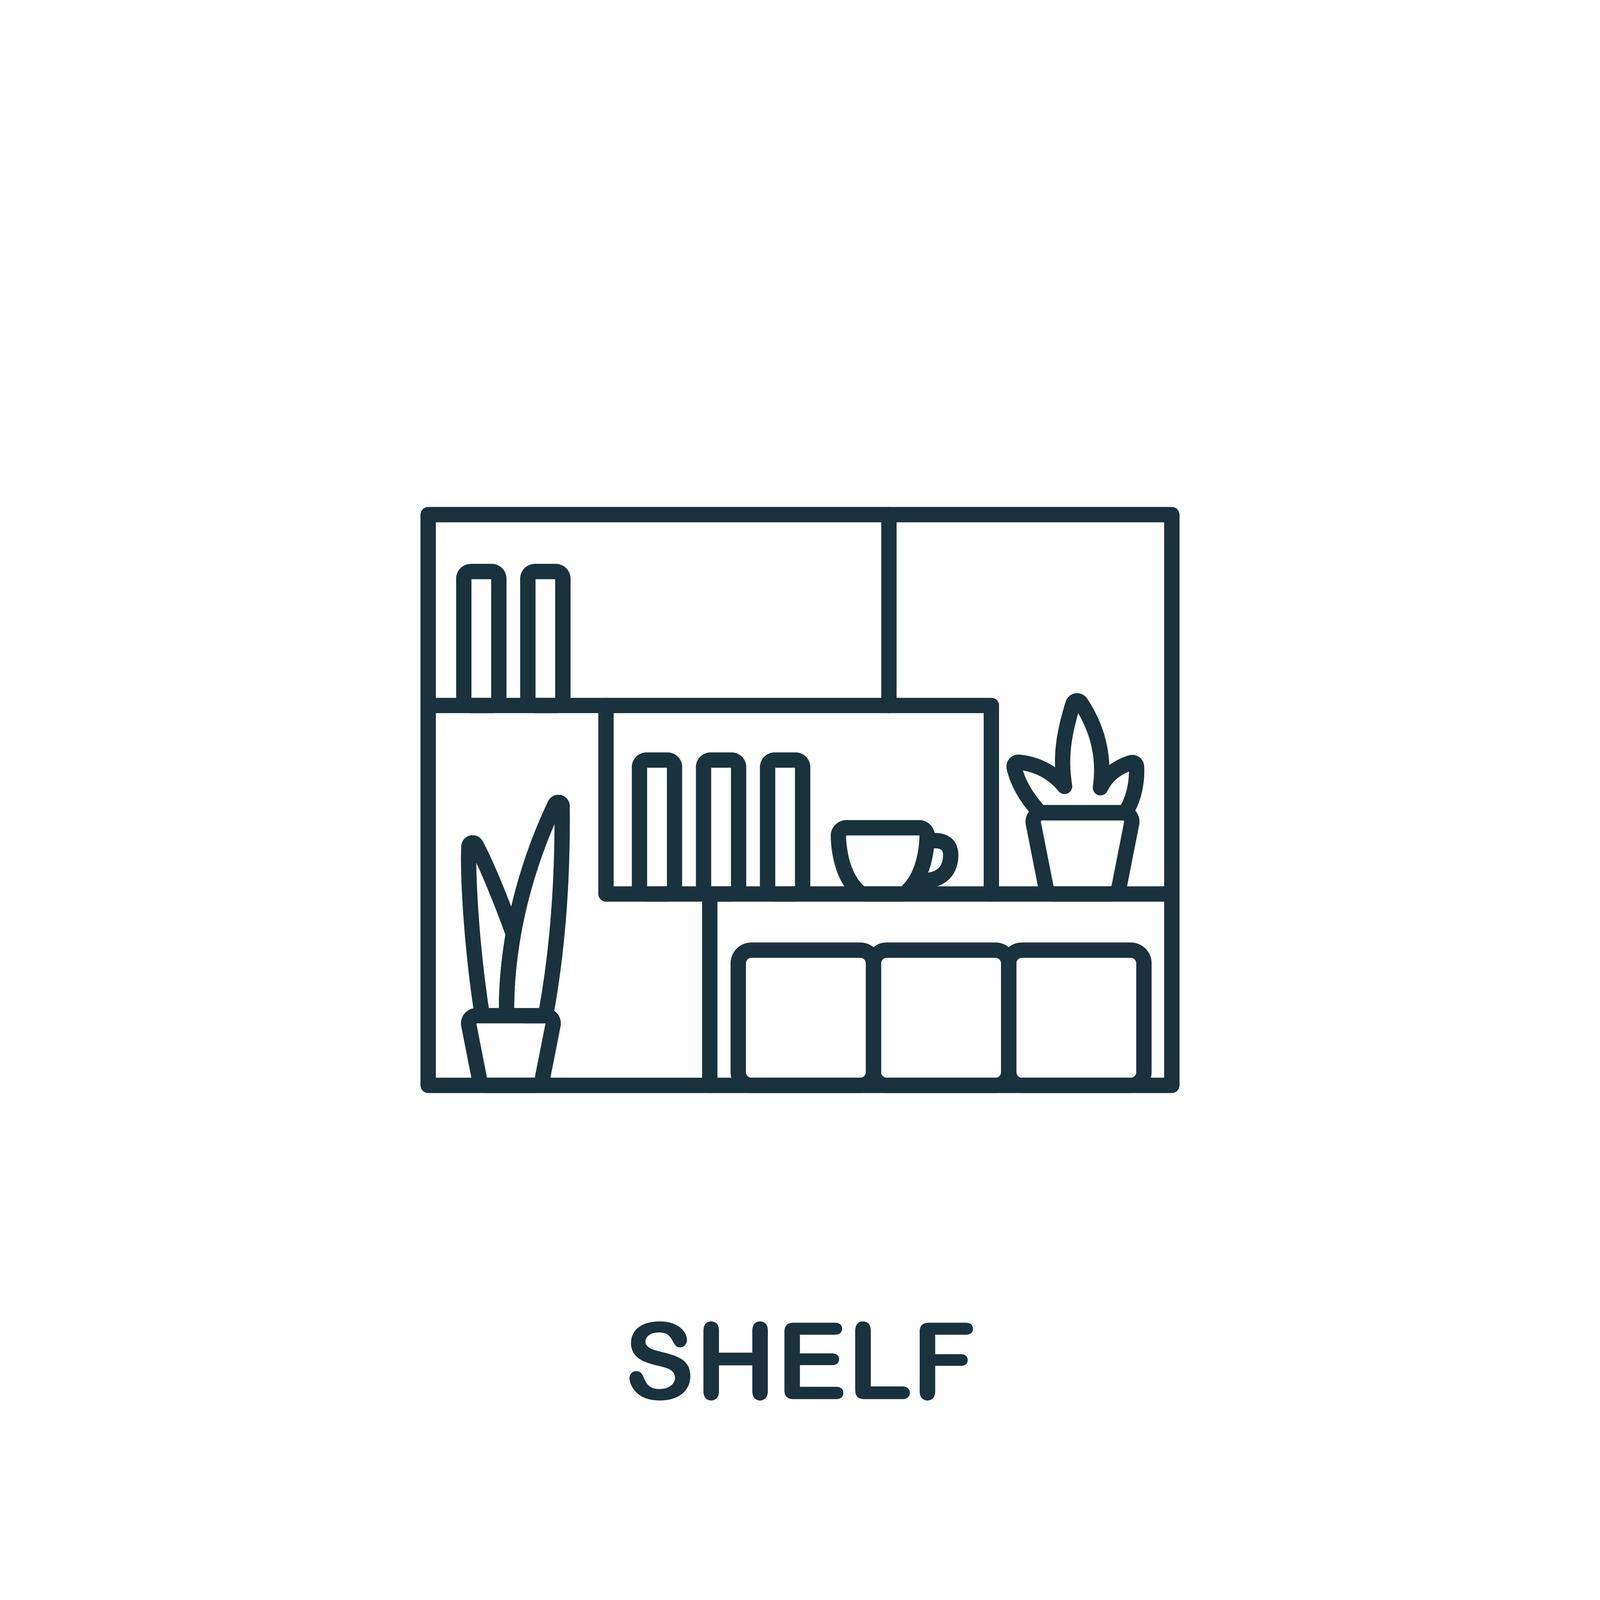 Shelf icon. Line simple Interior Furniture icon for templates, web design and infographics by simakovavector